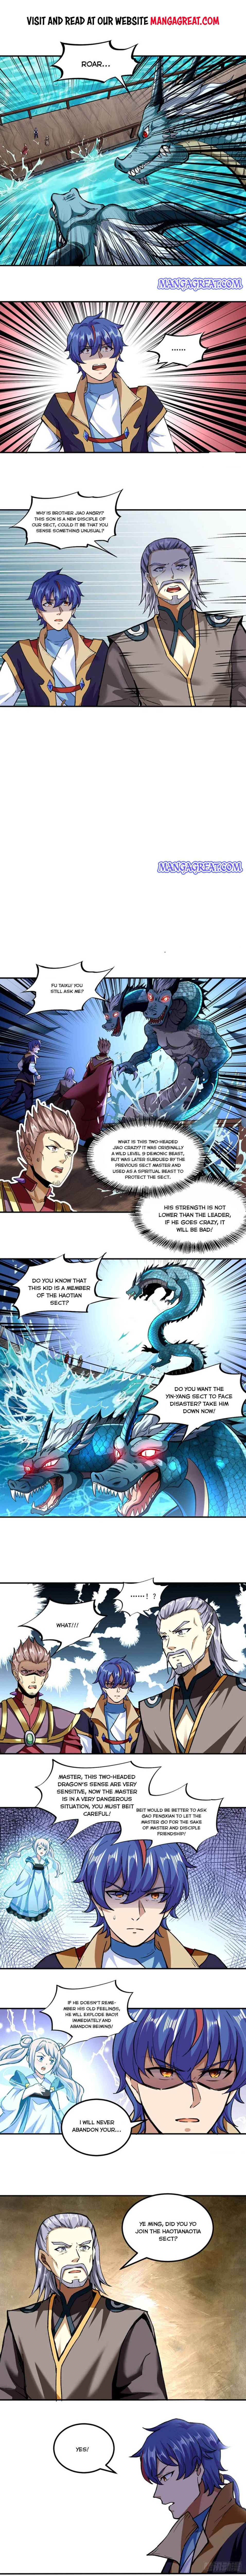 Martial Arts Reigns - Page 1